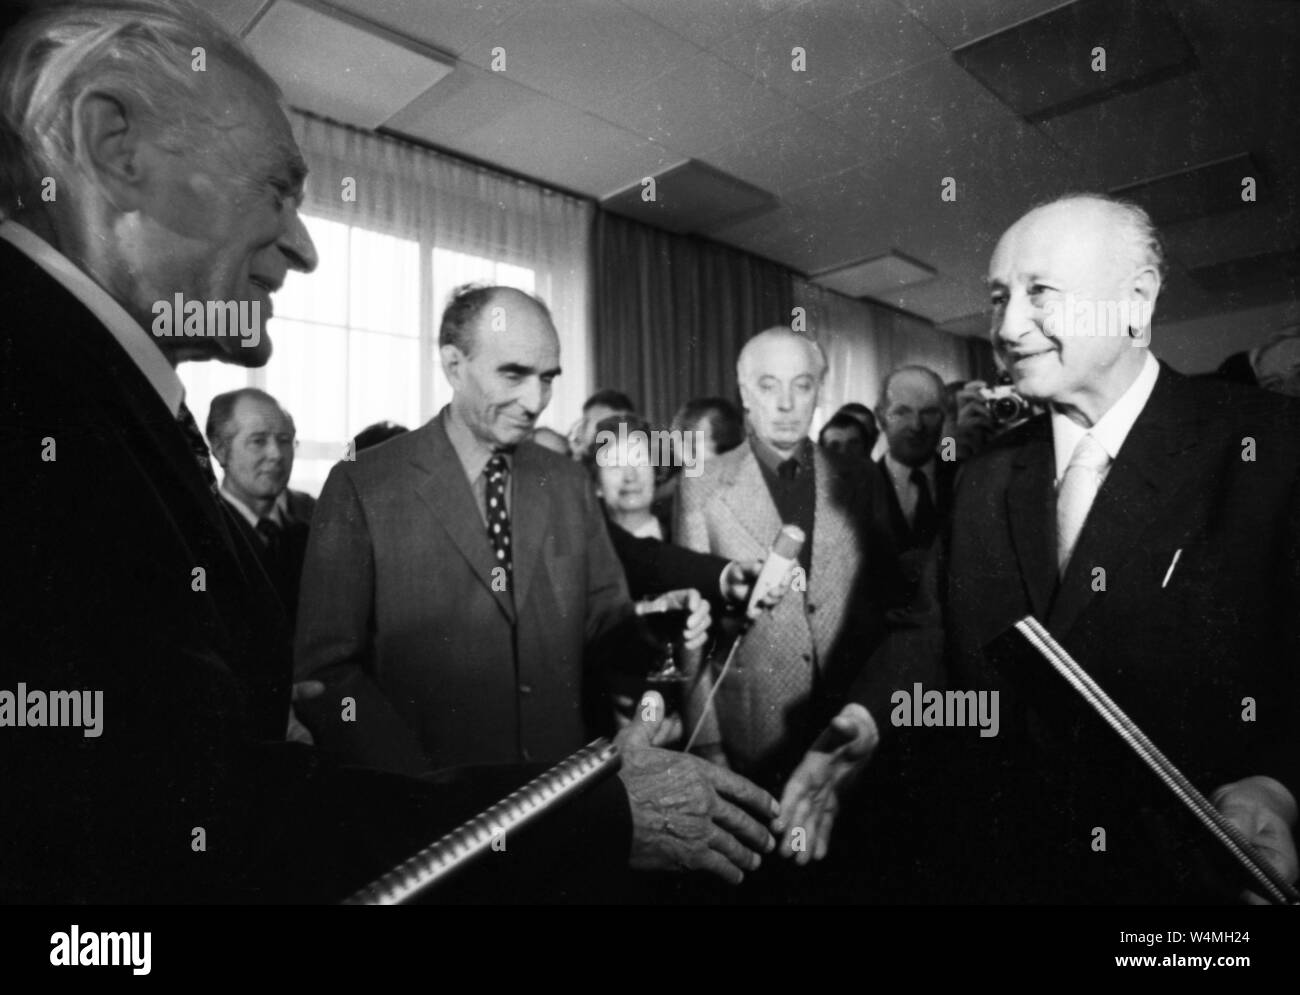 The senior of the West German Communists (KPD/ DKP), Max Reimann, celebrates his 75th birthday on 31 October 1973 in Duesseldorf. Max Reimann (l) with Albert Norden (SED, r) and Kurt Bachmann (2.v.l.) | usage worldwide Stock Photo